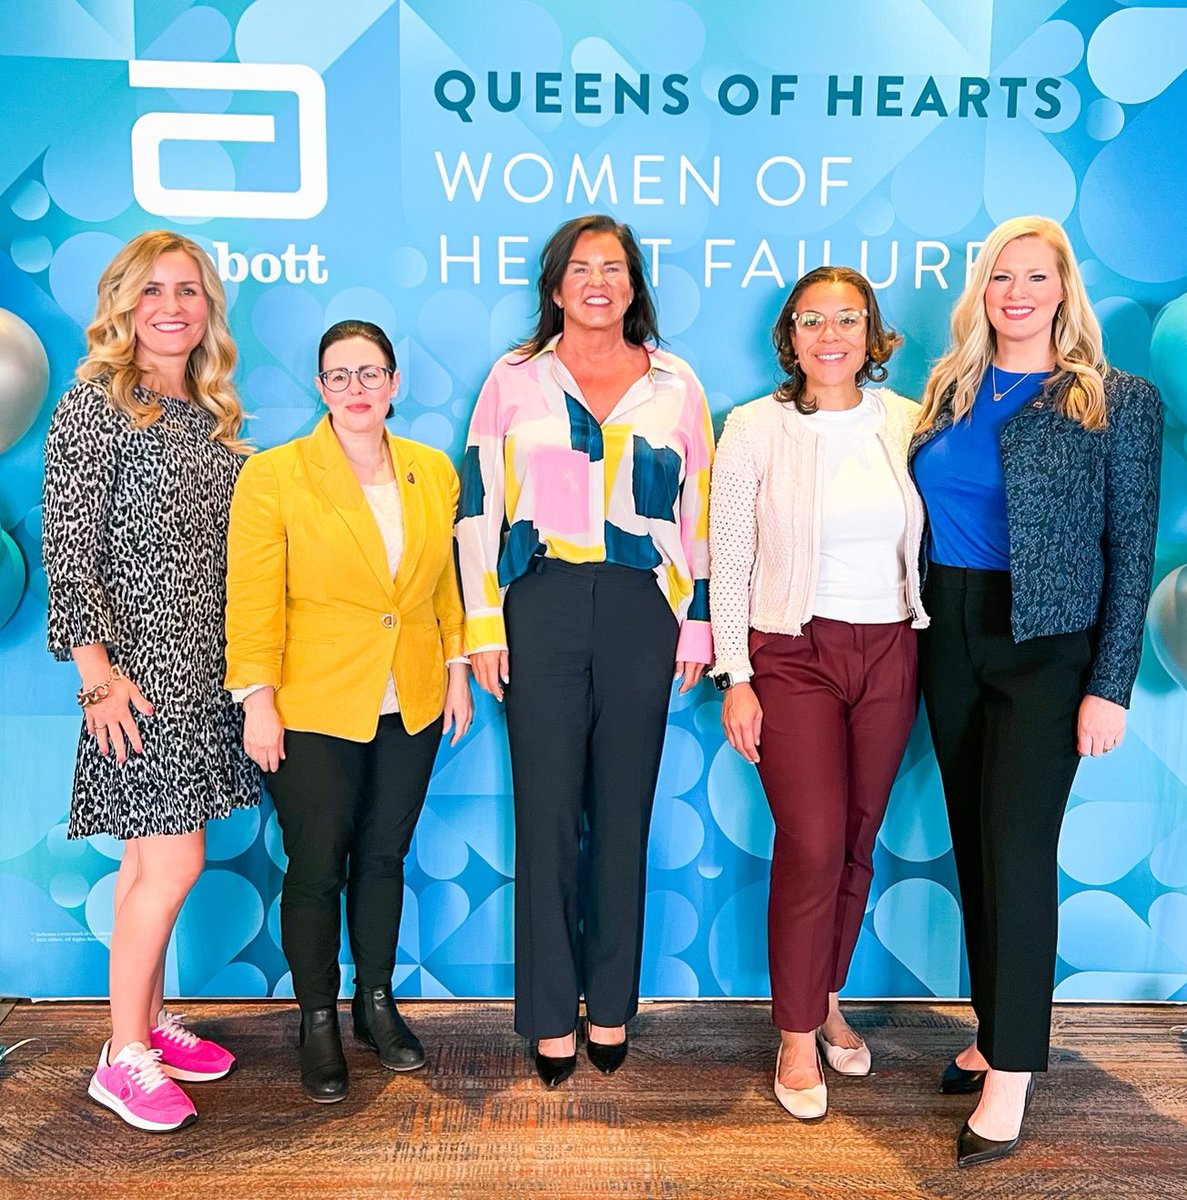 Women of Heart Failure are the Queens of Hearts. Let’s lift each other up and be champions for female colleagues, friends and patients. Thank you to all who attended and to our speakers for inspiring us.
#HeartFailure #IntersectionalFeminism  #AbbottProud
#ishlt2023